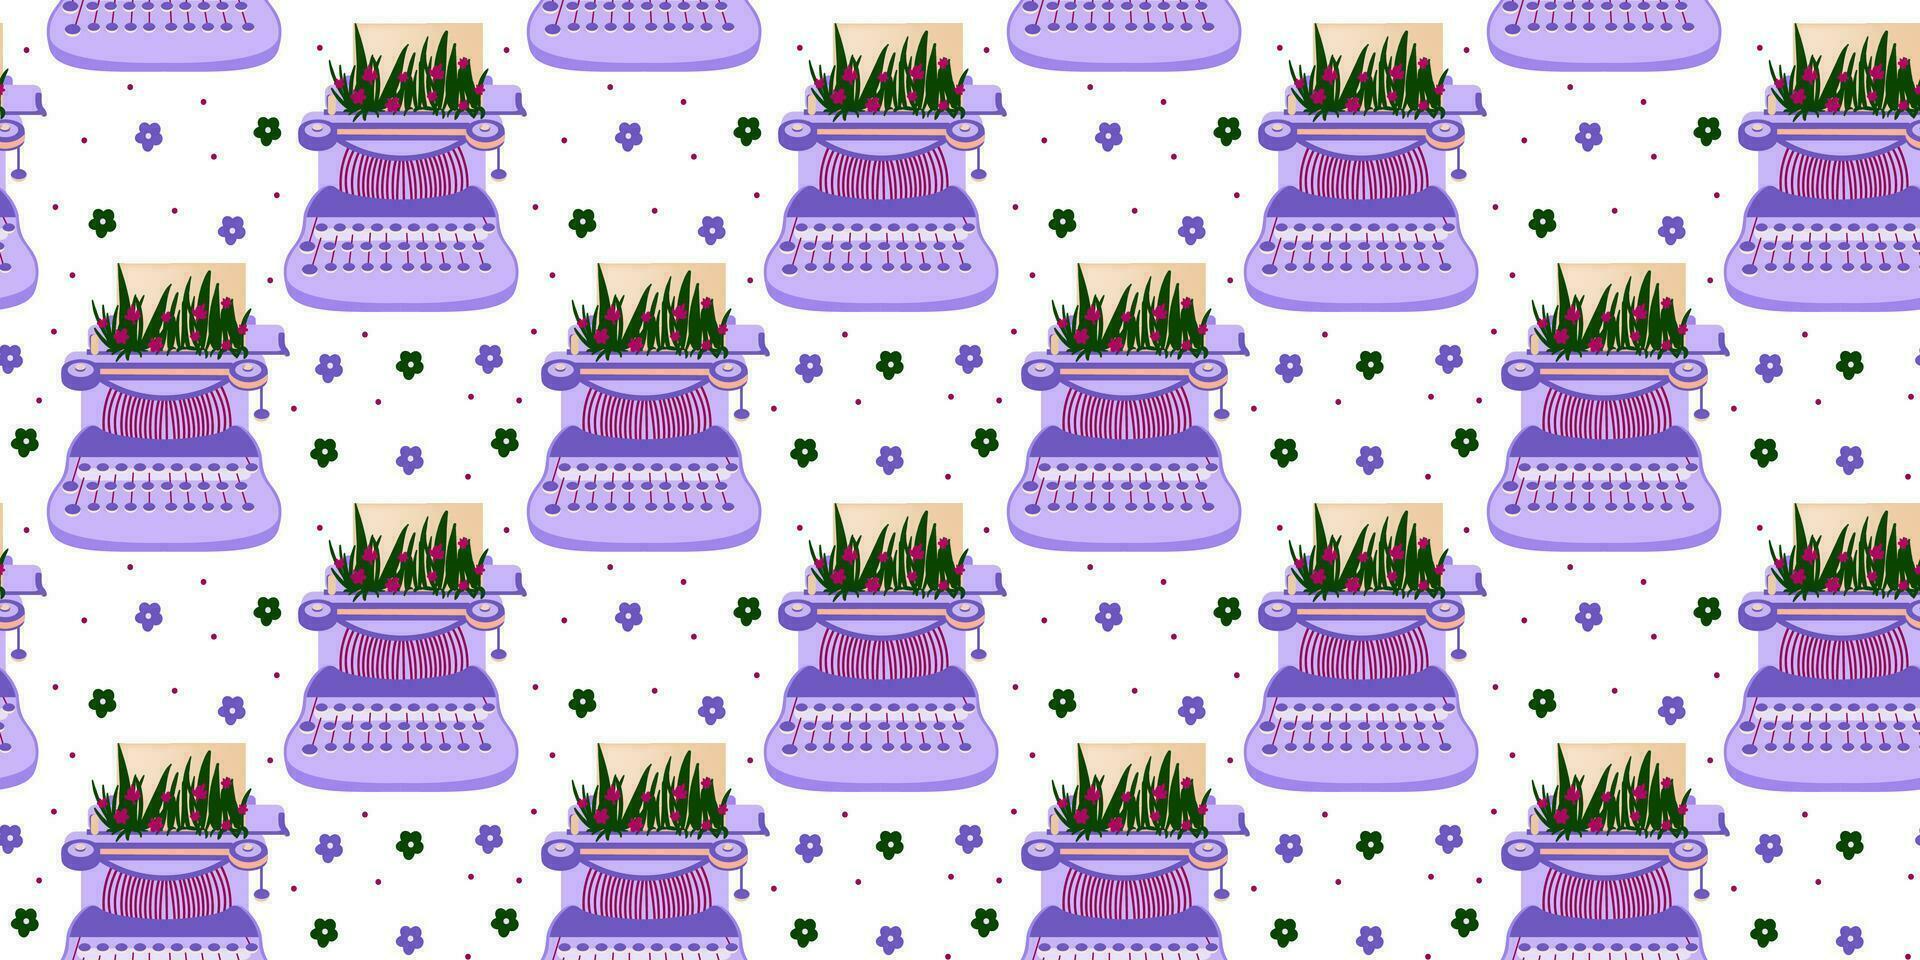 Typewriter with colors seamless pattern. Colorful hand drawn illustration. Design overlapping background vector. Decorative wallpaper, good for printing vector